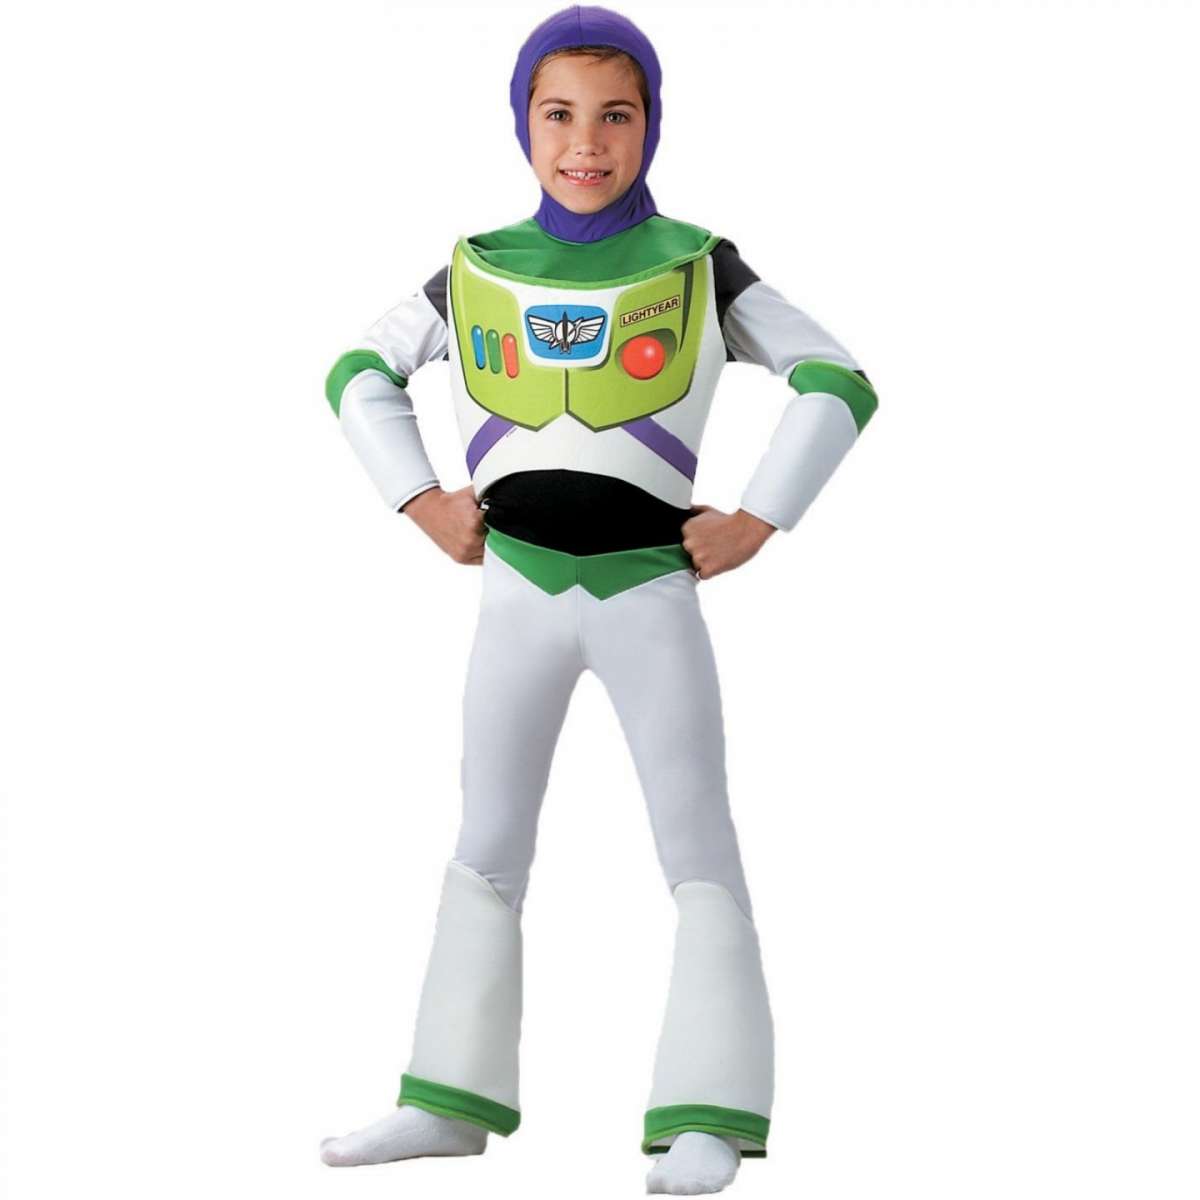 Toy Story costume